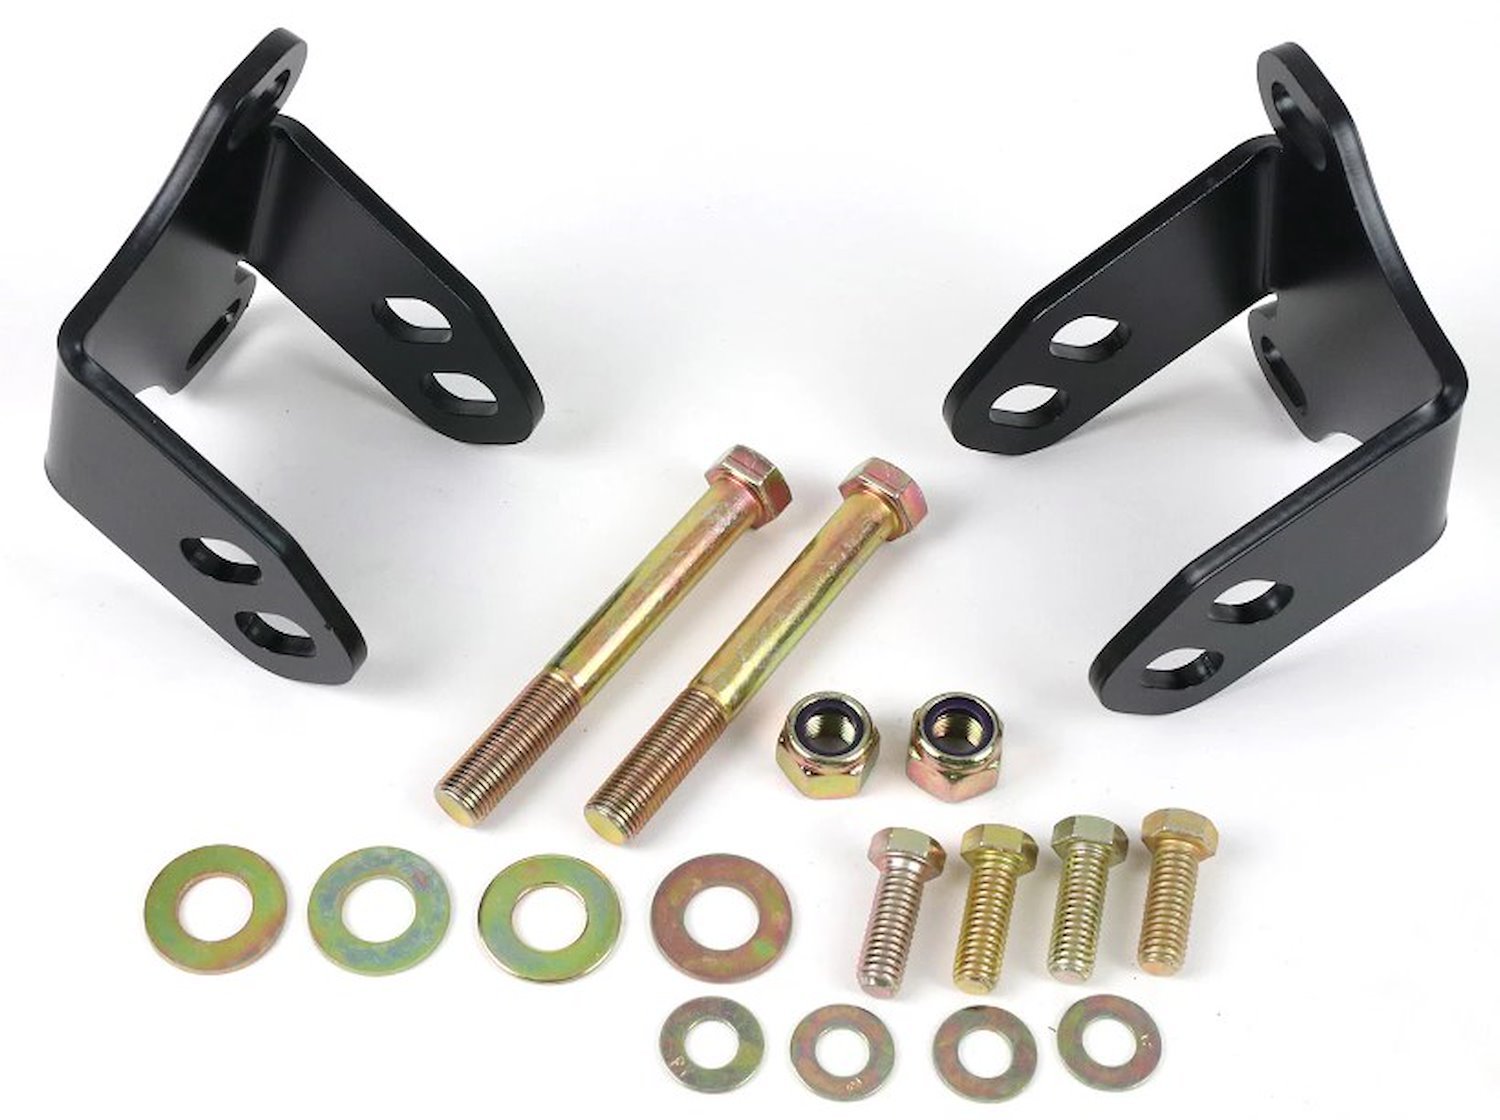 Ford FE Engine Mounts for 1965-1979 Ford F-100, F-150 Trucks 2WD w/Ridetech Front Suspension System